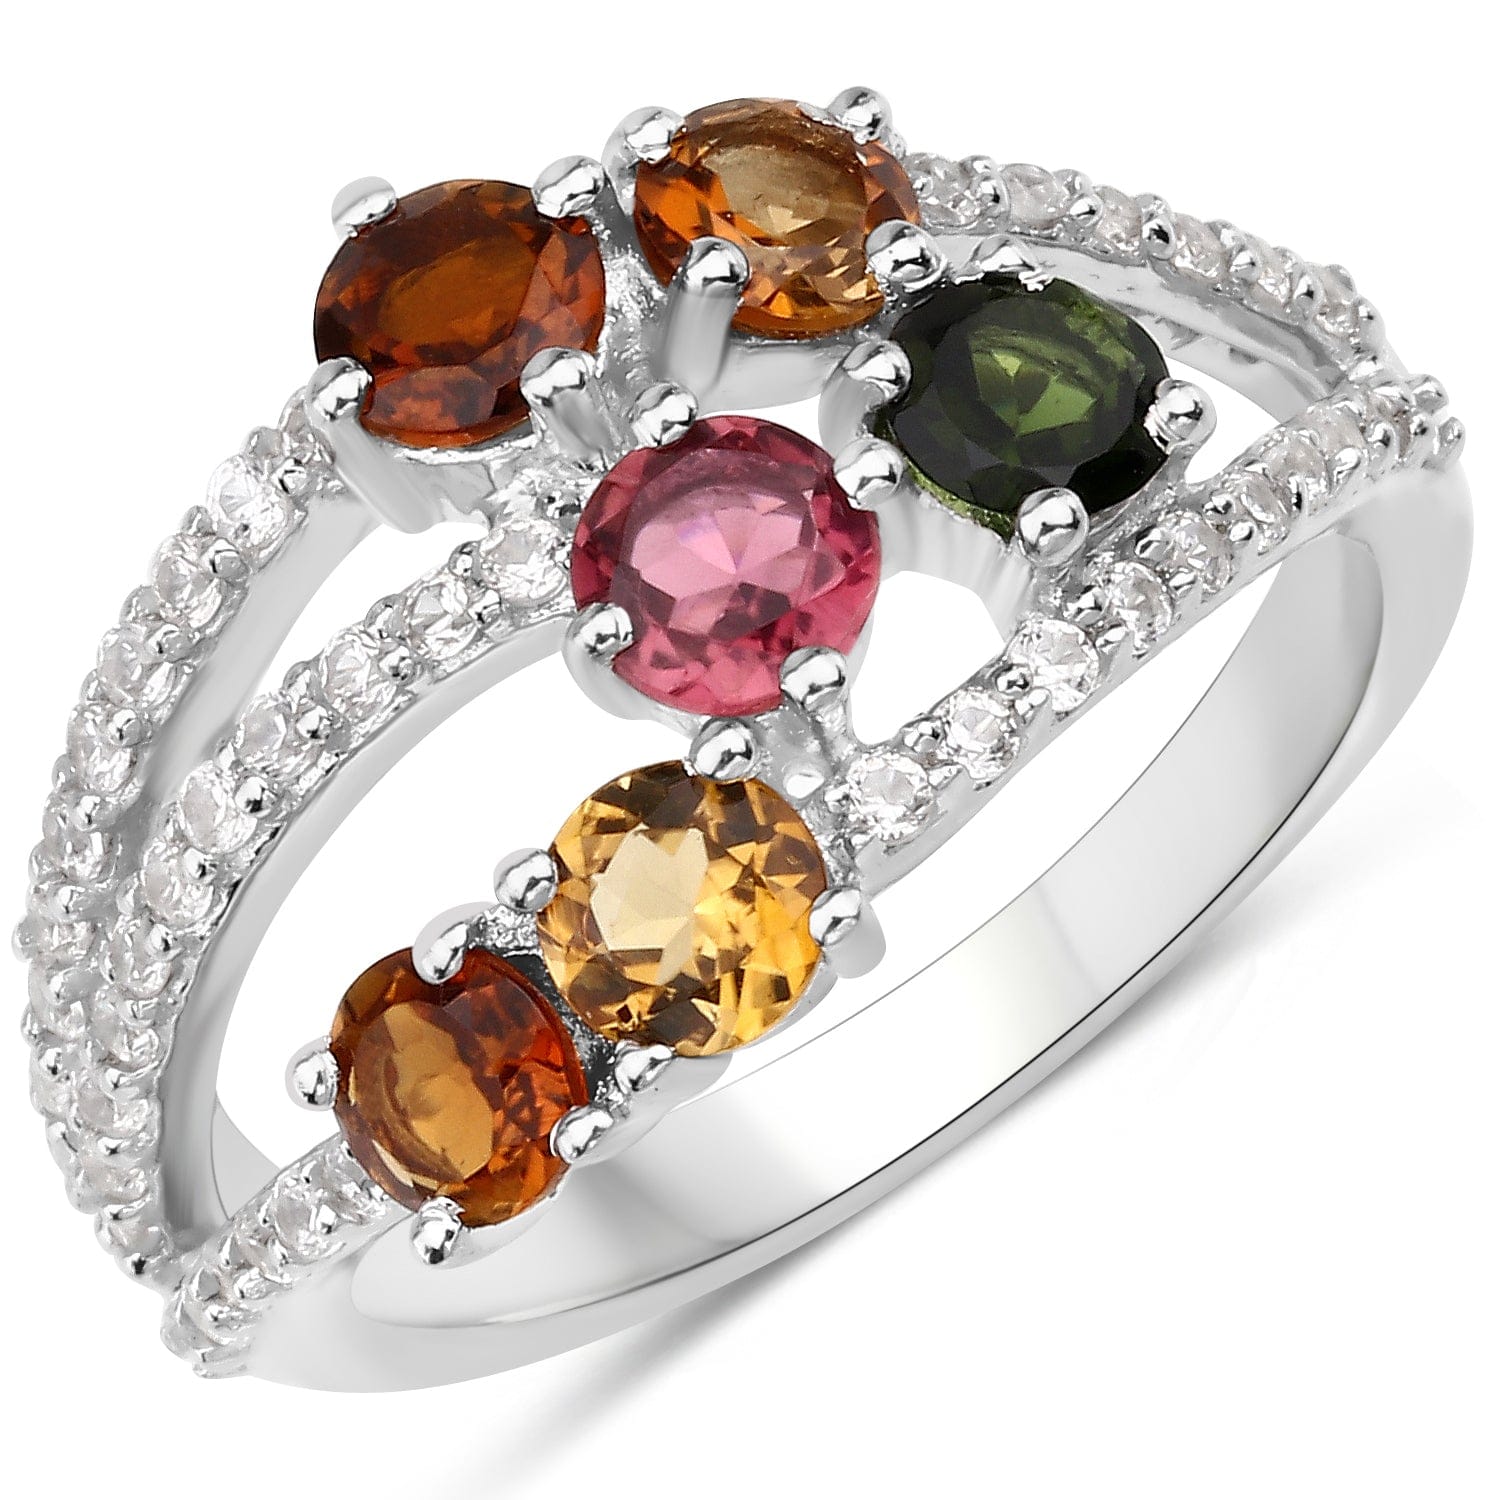 Multi-Colored Tourmaline Cocktail Ring in Sterling Silver-Colorful Beauty! - The Pink Pigs, A Compassionate Boutique